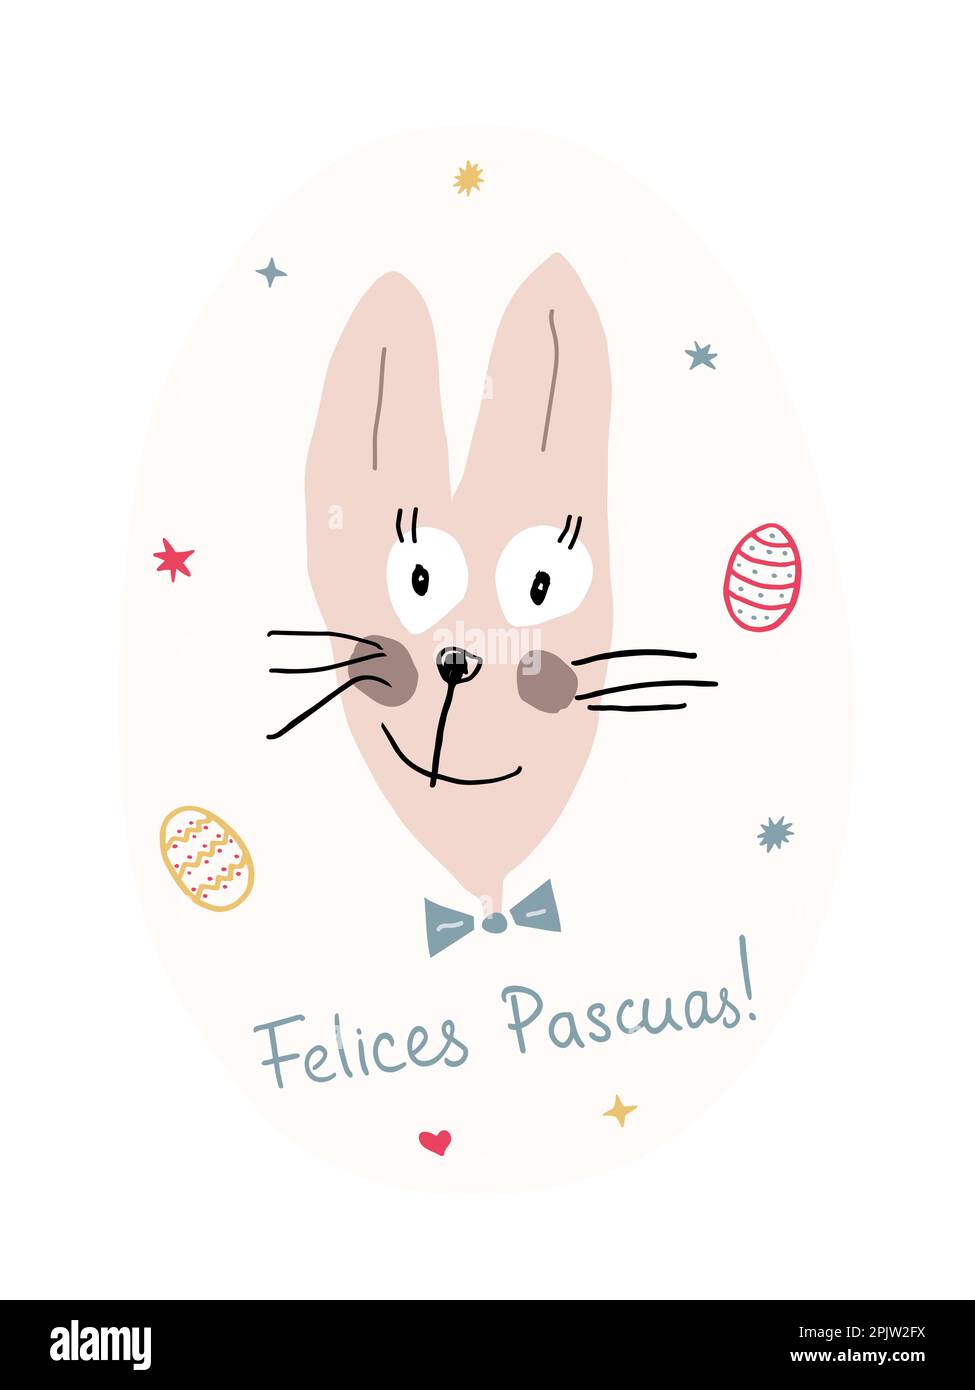 Cute funny Easter Bunny with writing in Spanish Felices Pascuas which means Happy Easter. Painted easter eggs and stars around. Greeting card. Cartoon Stock Vector